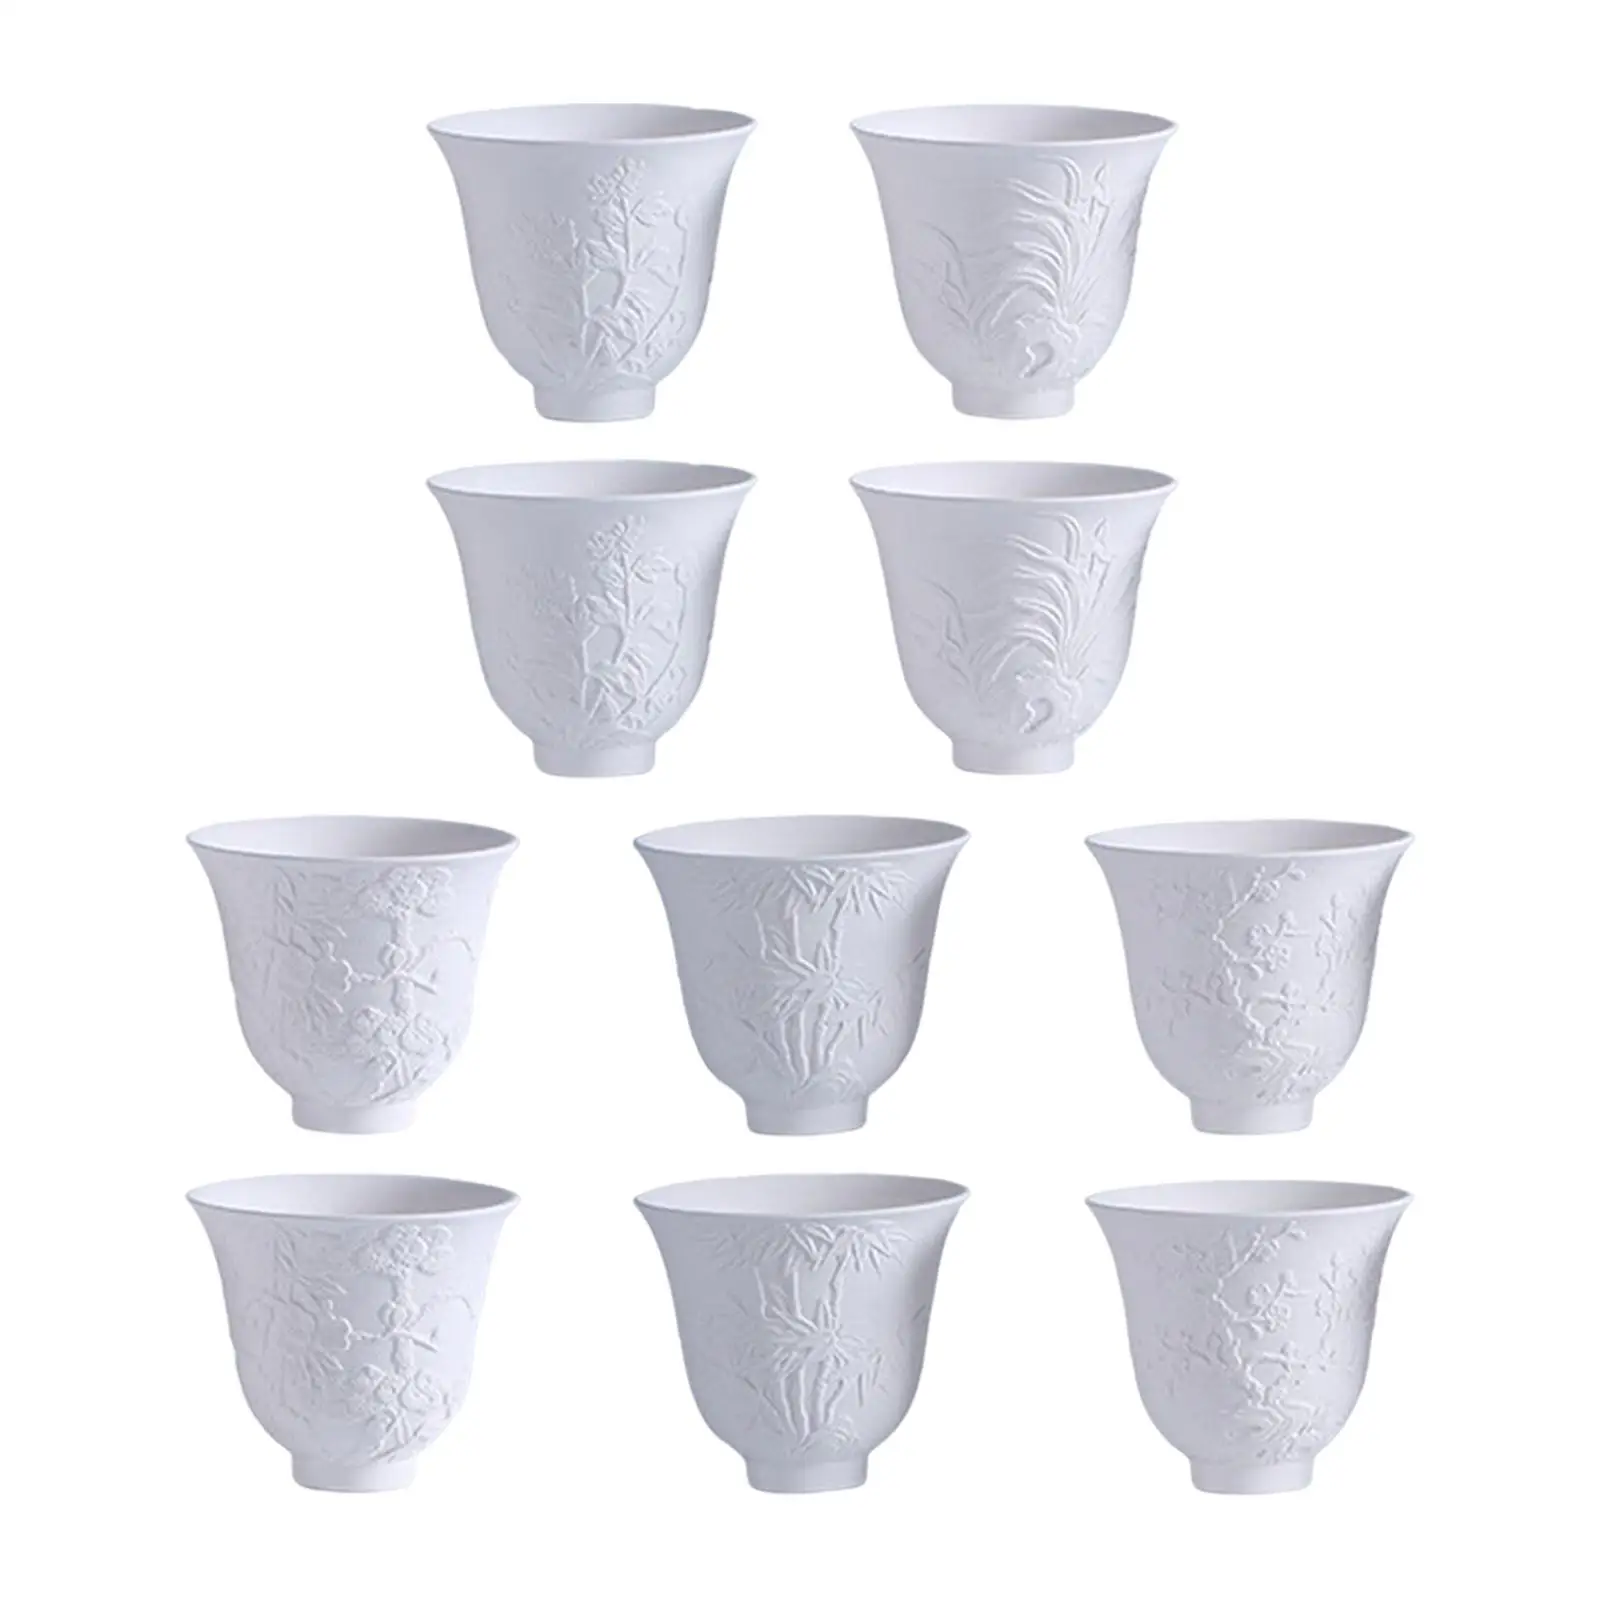 10Pcs Ceramic Bisque Cup with Embossed Pattern Unpainted Teacup for Party Kid Gift